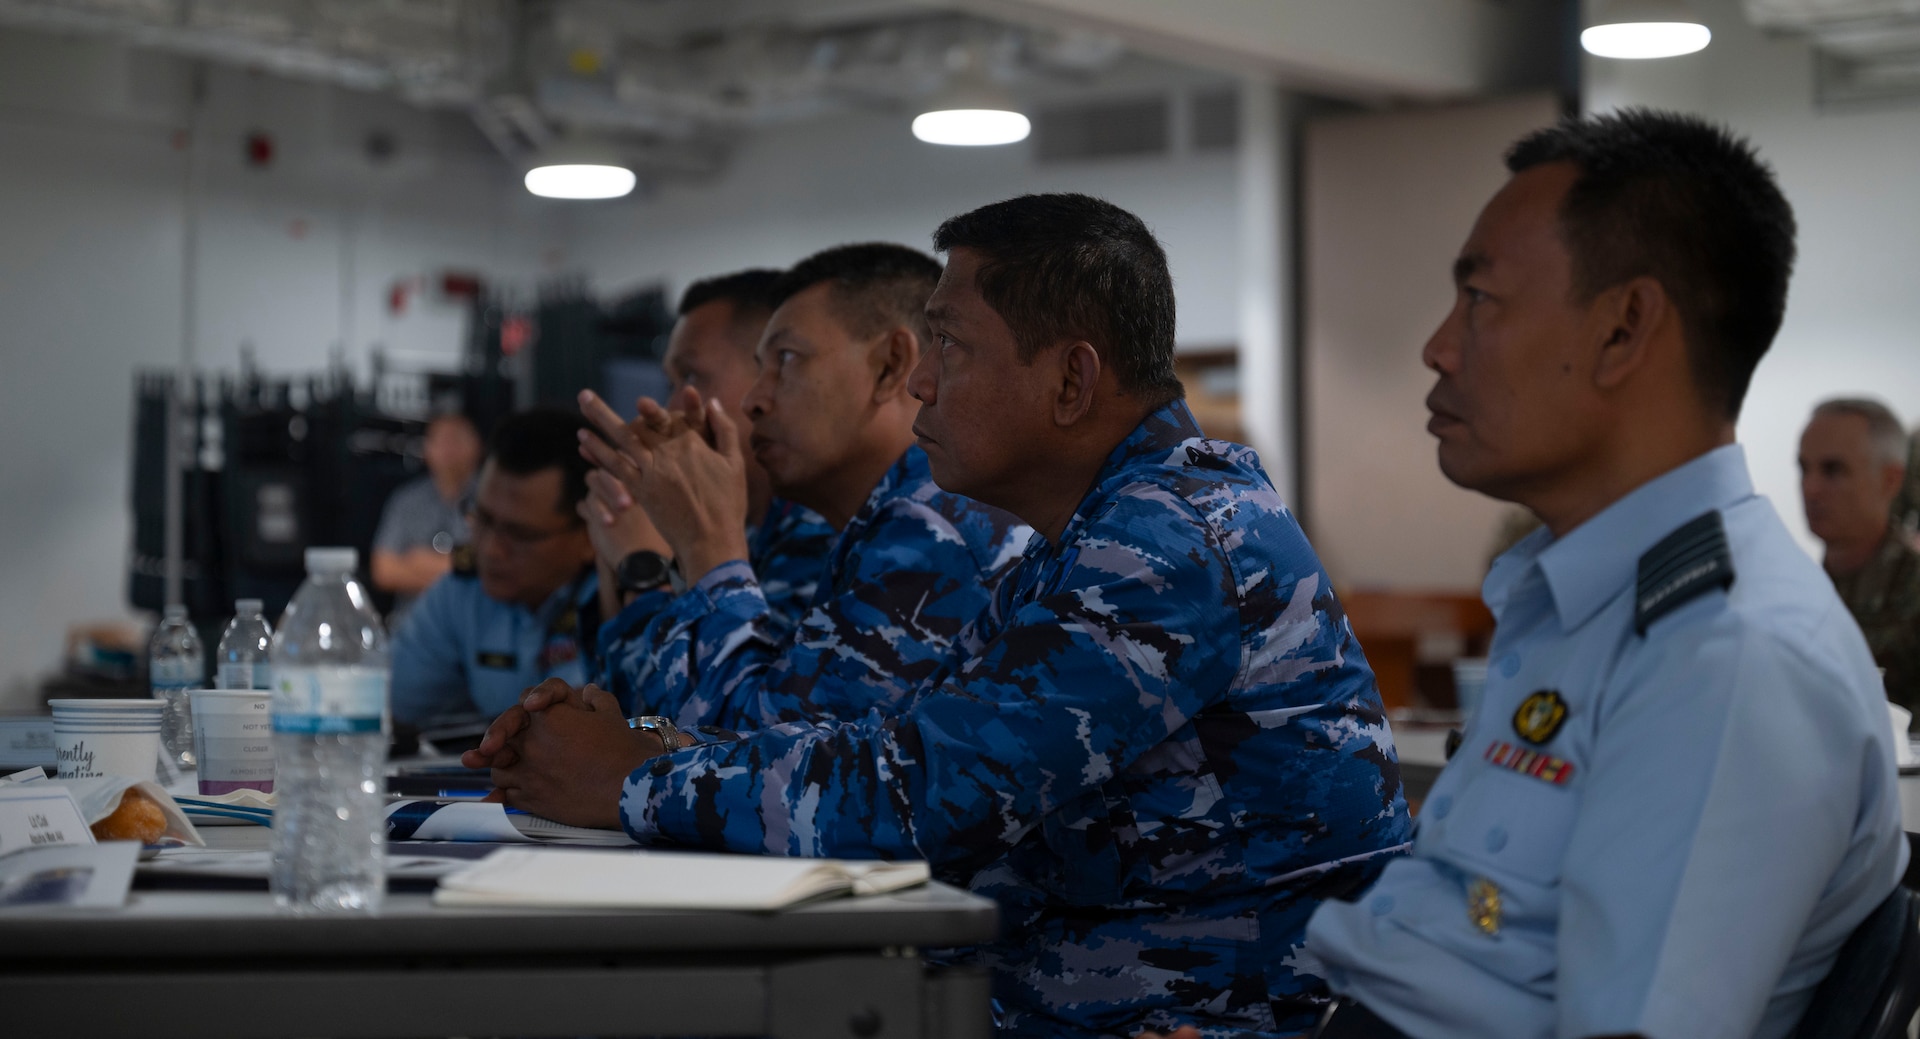 Members of the Indonesian Air Force listen to a brief during the Regional Air Domain Awareness Senior Leader Seminar on Andersen Air Force Base, Guam, Feb. 26, 2024. Throughout the seminar, leaders discussed air domain strategies, policies, terminology and also developed a network of Allies and partners that have a shared understanding of air domain awareness. (U.S. Air Force photo by Airman 1st Class Spencer Perkins)